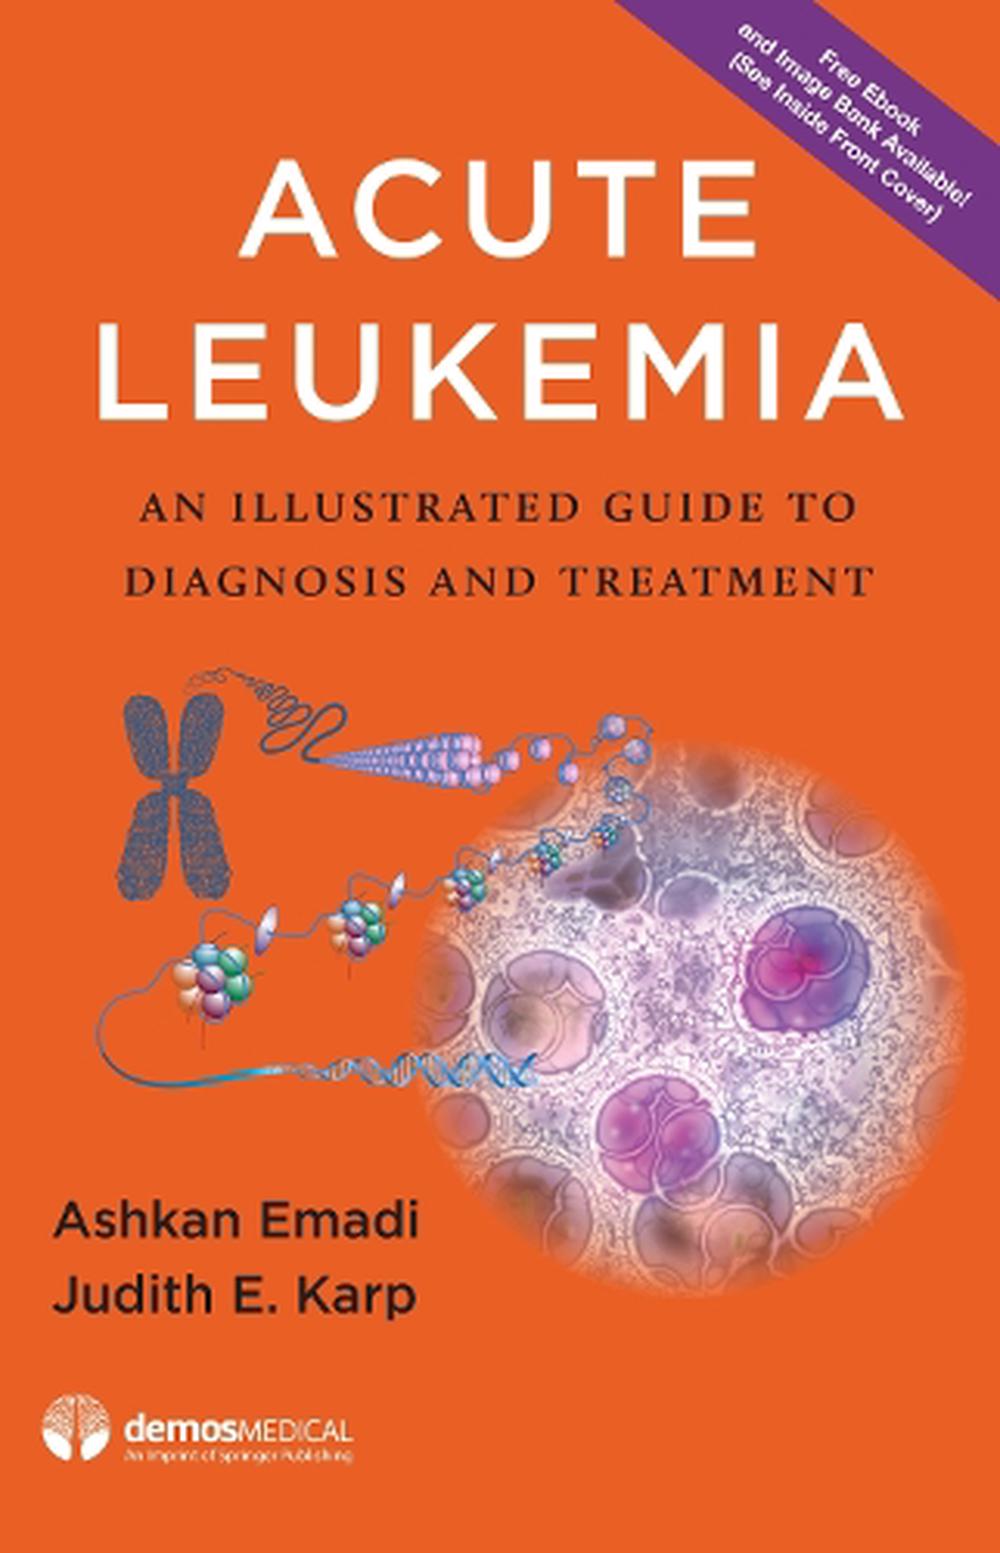 research articles on leukemia